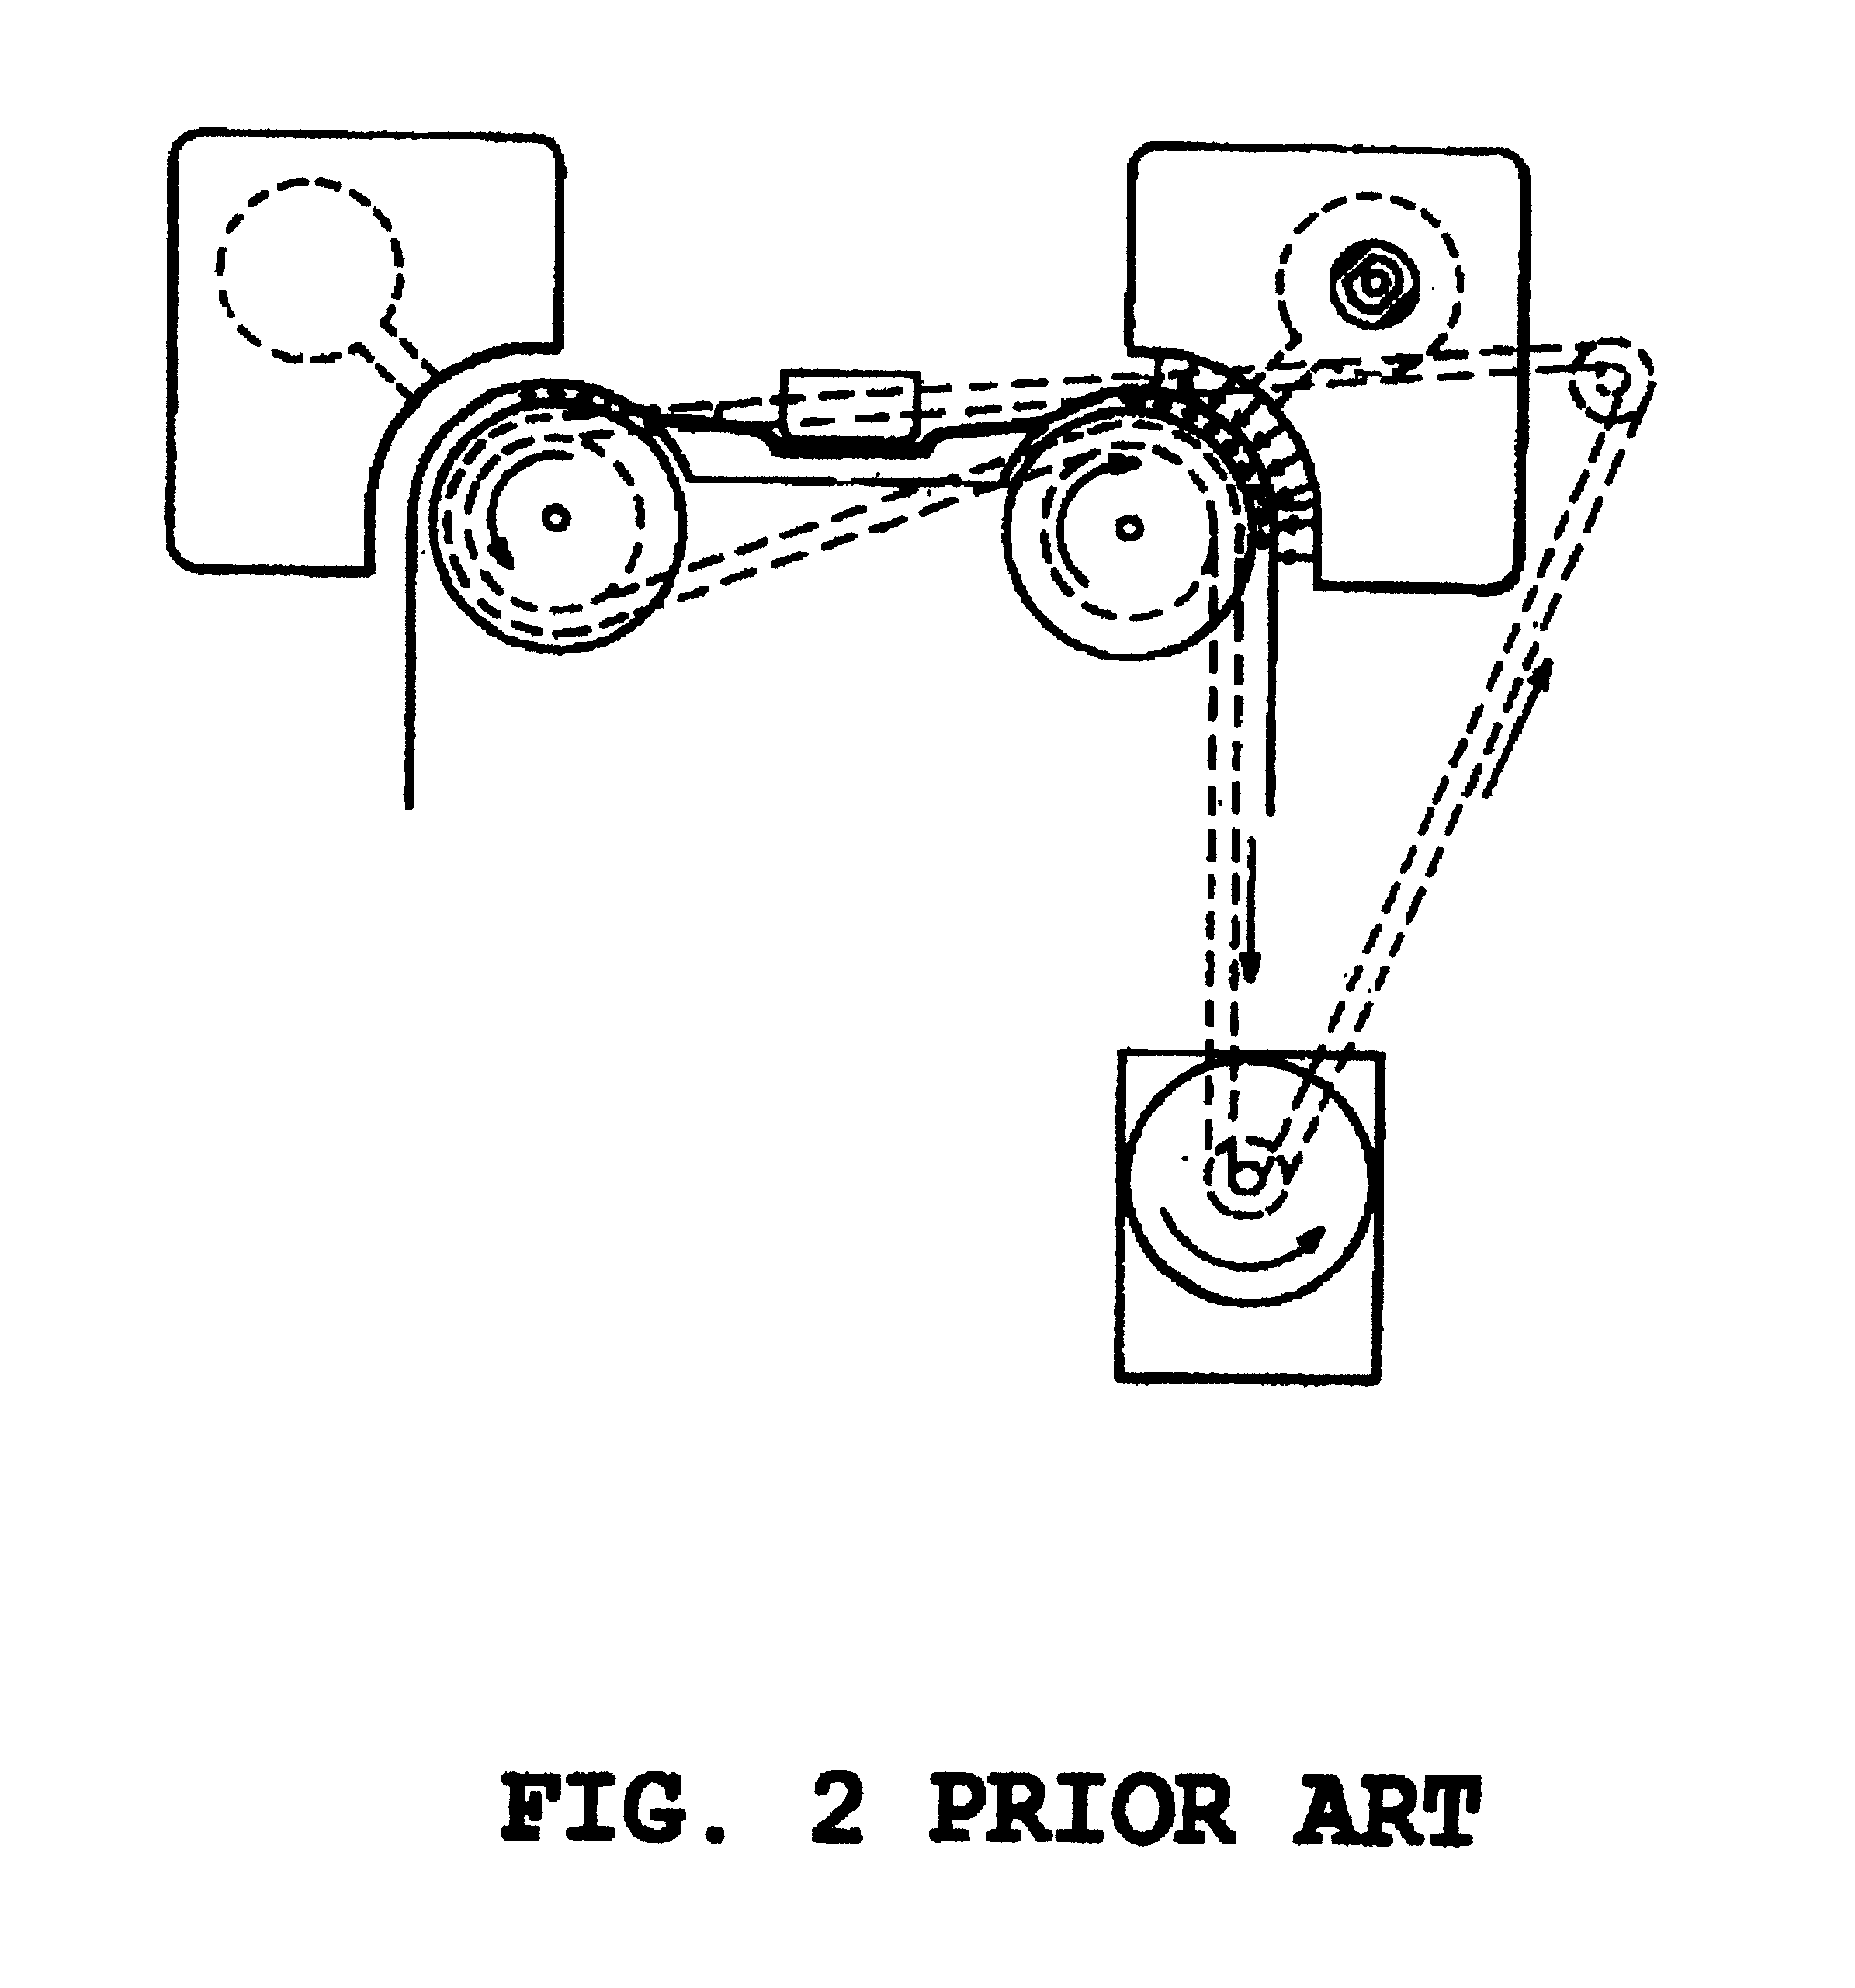 Flexible web roller guide assembly with an integral centrifugal pump capability to provide a hydrostatic air bearing function to the roller guides outside supporting surface